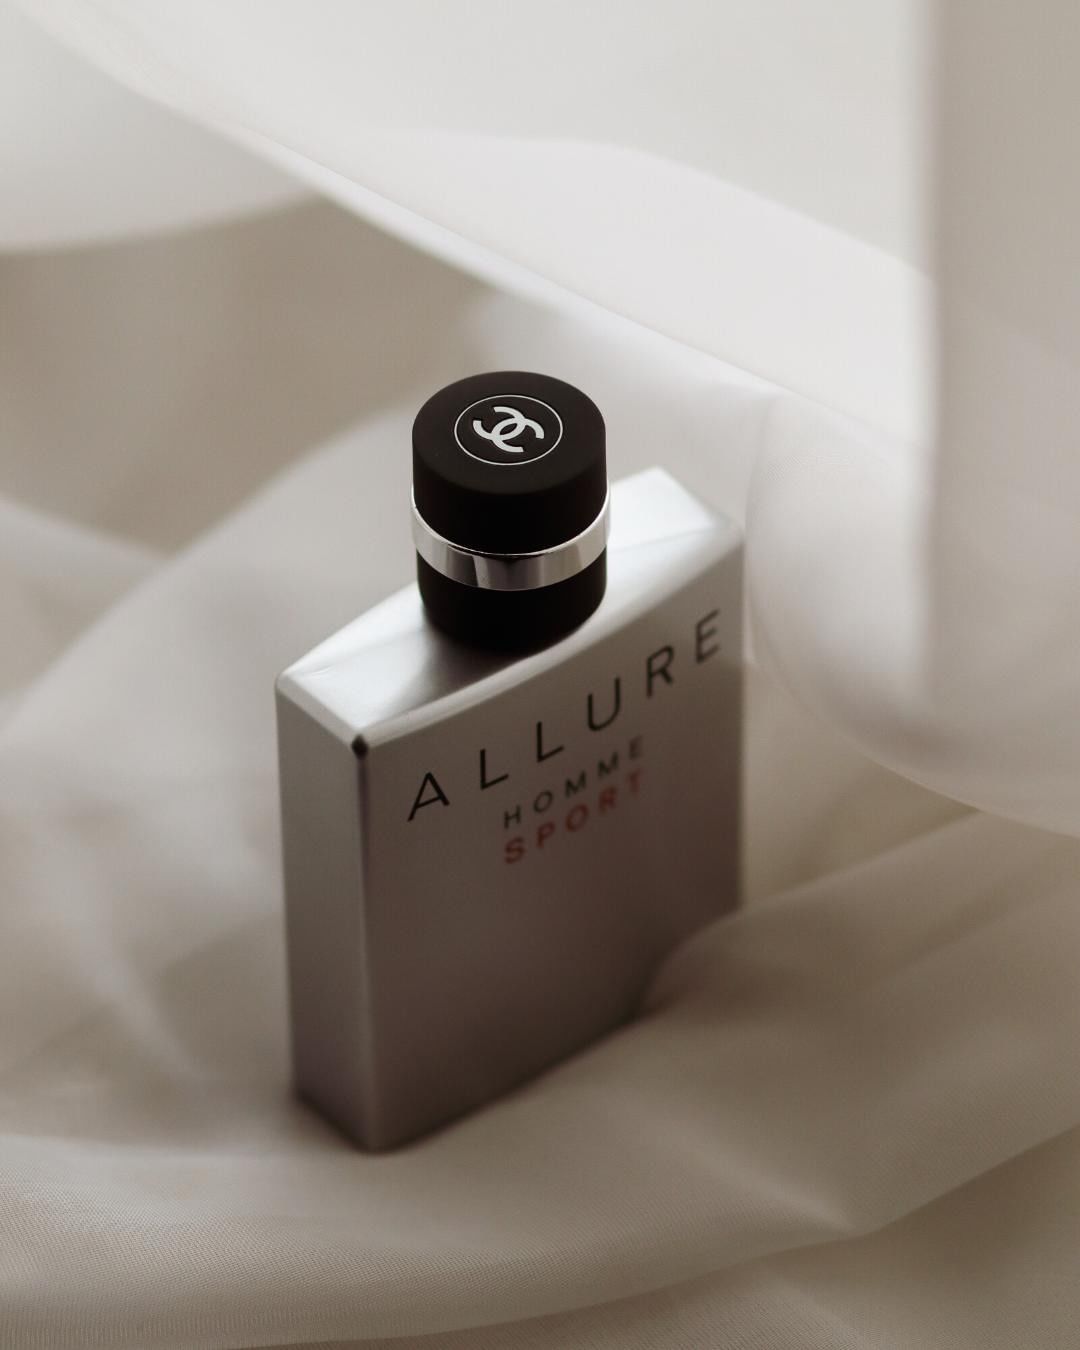 7/24 Perfumes - CHANEL Allure Sport perfume. Fresh and citrusy with a floral note, this scent is the perfect addition to any look. .
.
عطر يعطي الشعور بالانتعاش بمزيج رائع بين رائحة الحمضيات والزهور،...